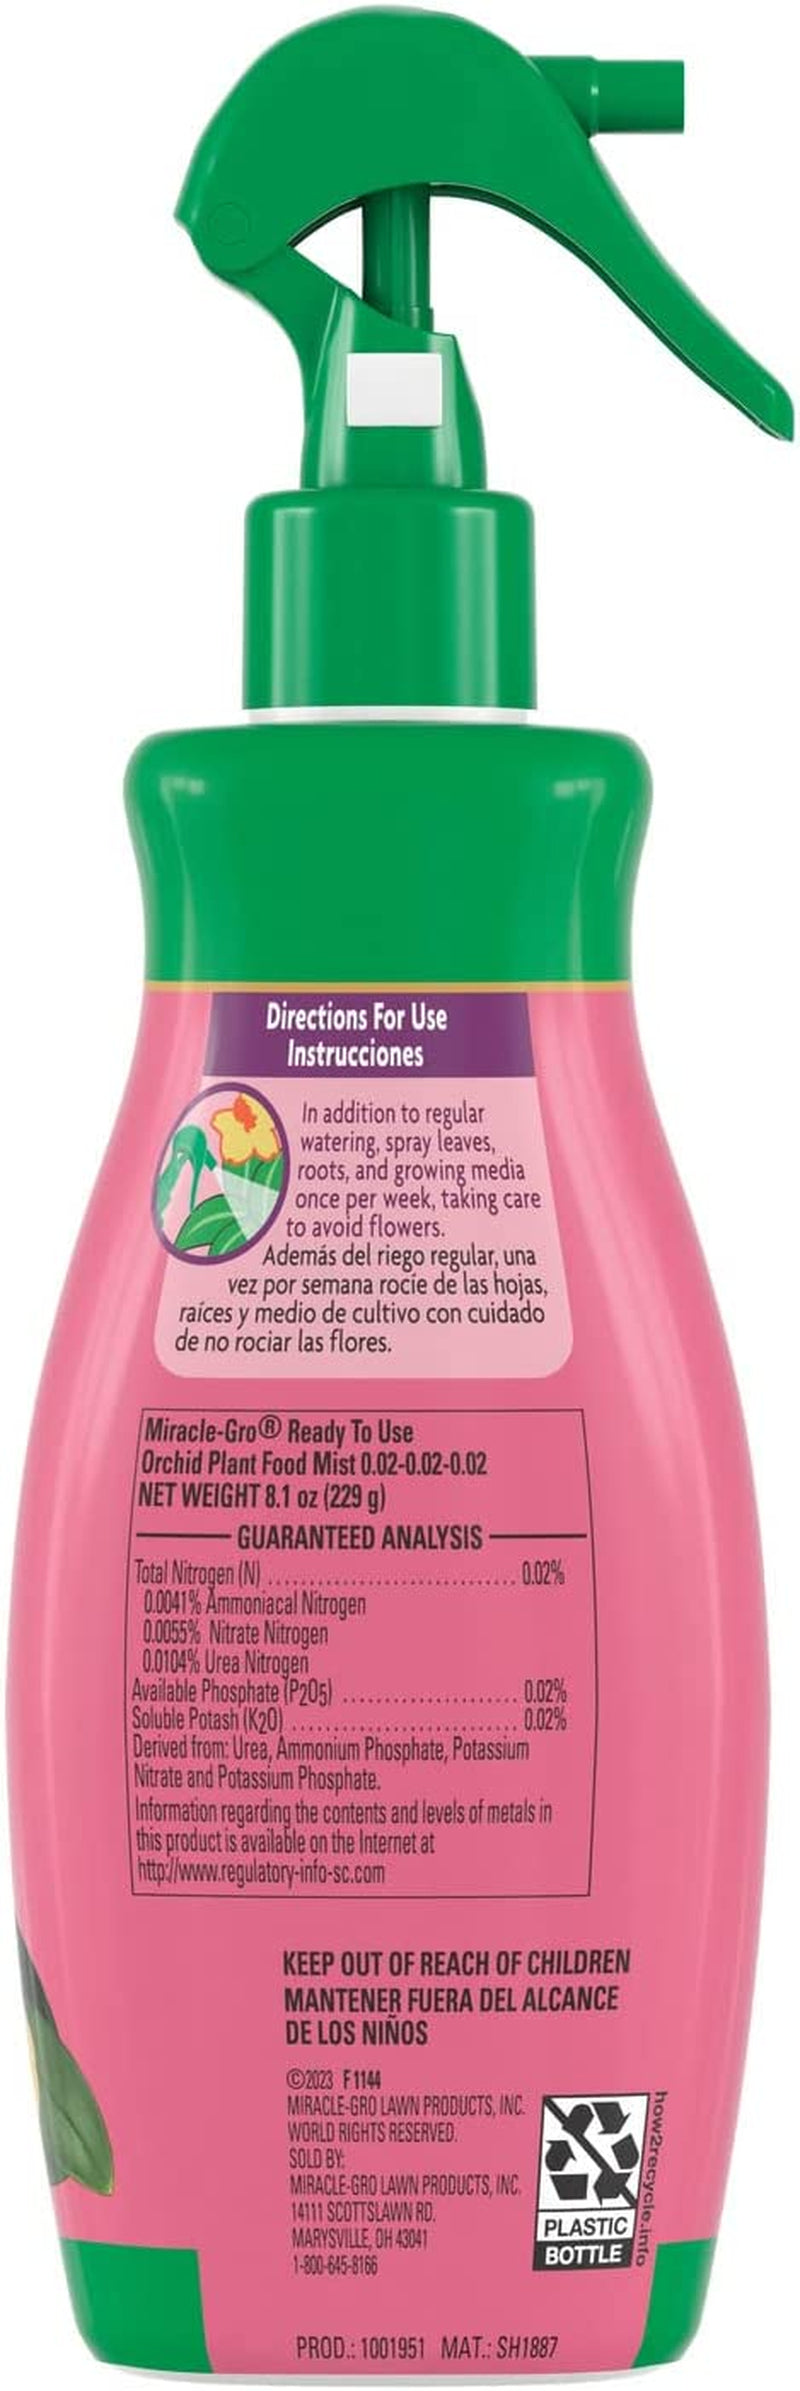 Miracle-Gro Ready-To-Use Orchid Plant Food Mist, 8 Oz., Feeds Plants Instantly, 1 Pack